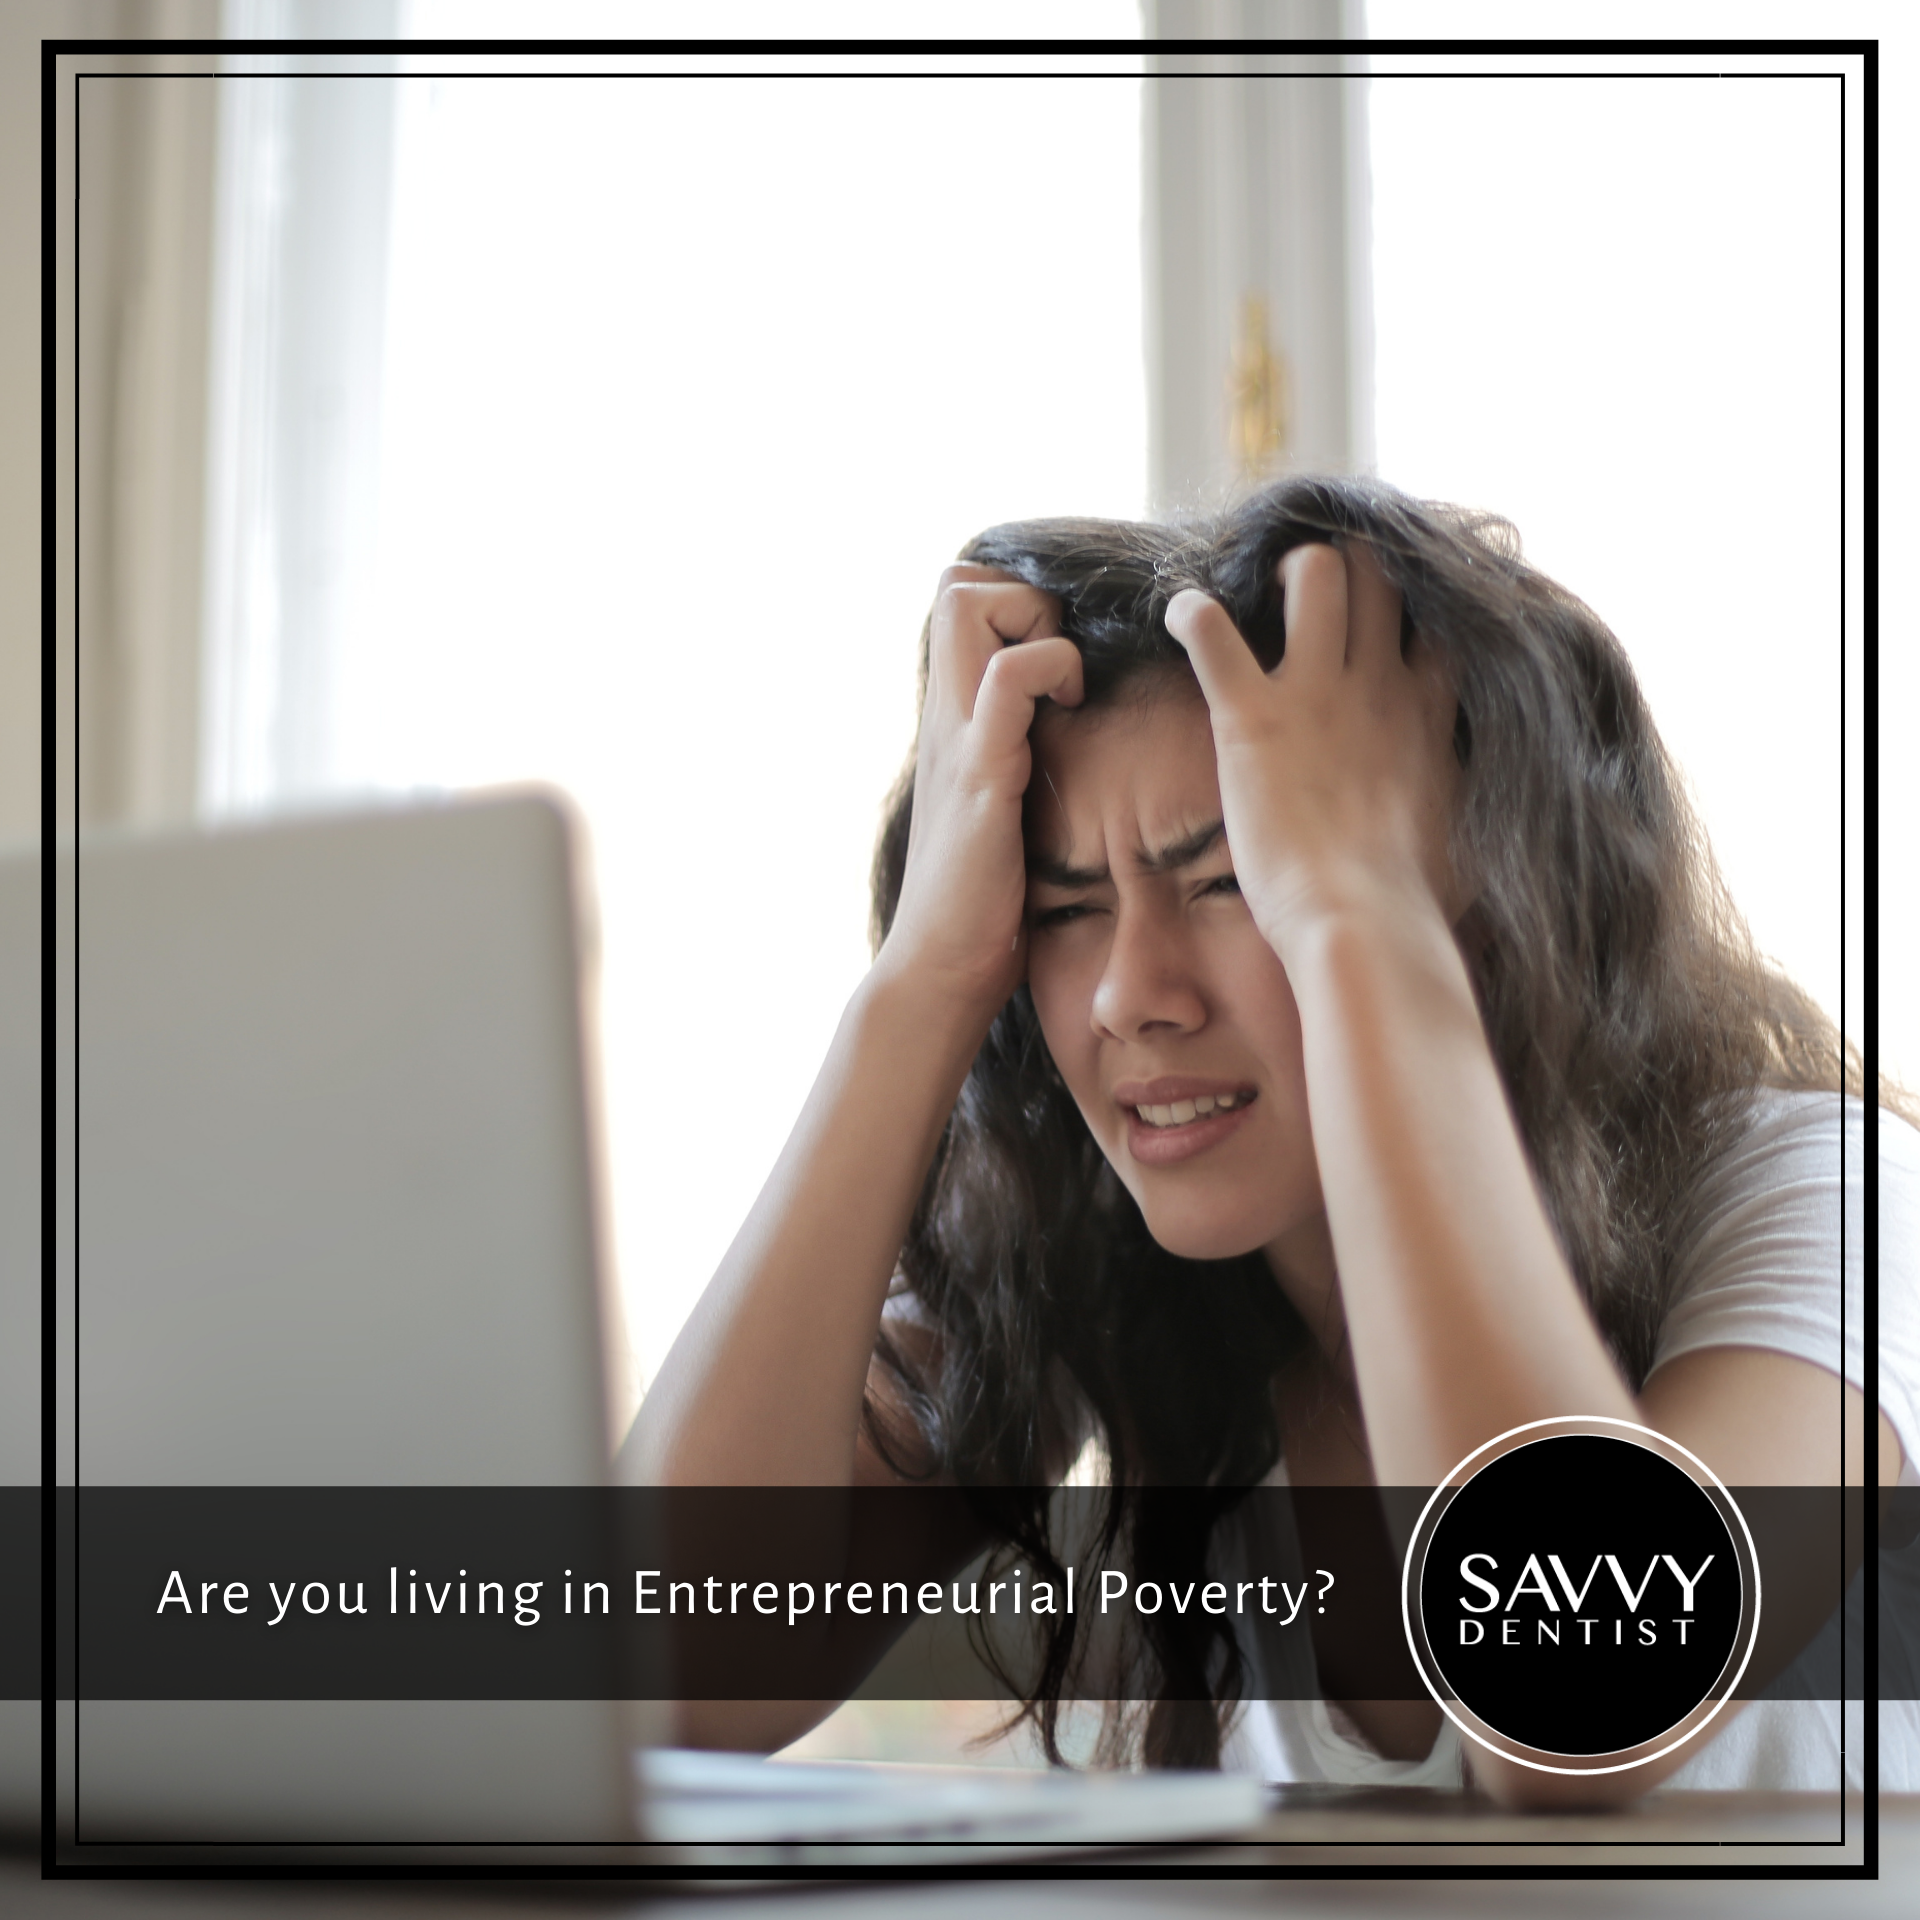 Are you living in Entrepreneurial Poverty